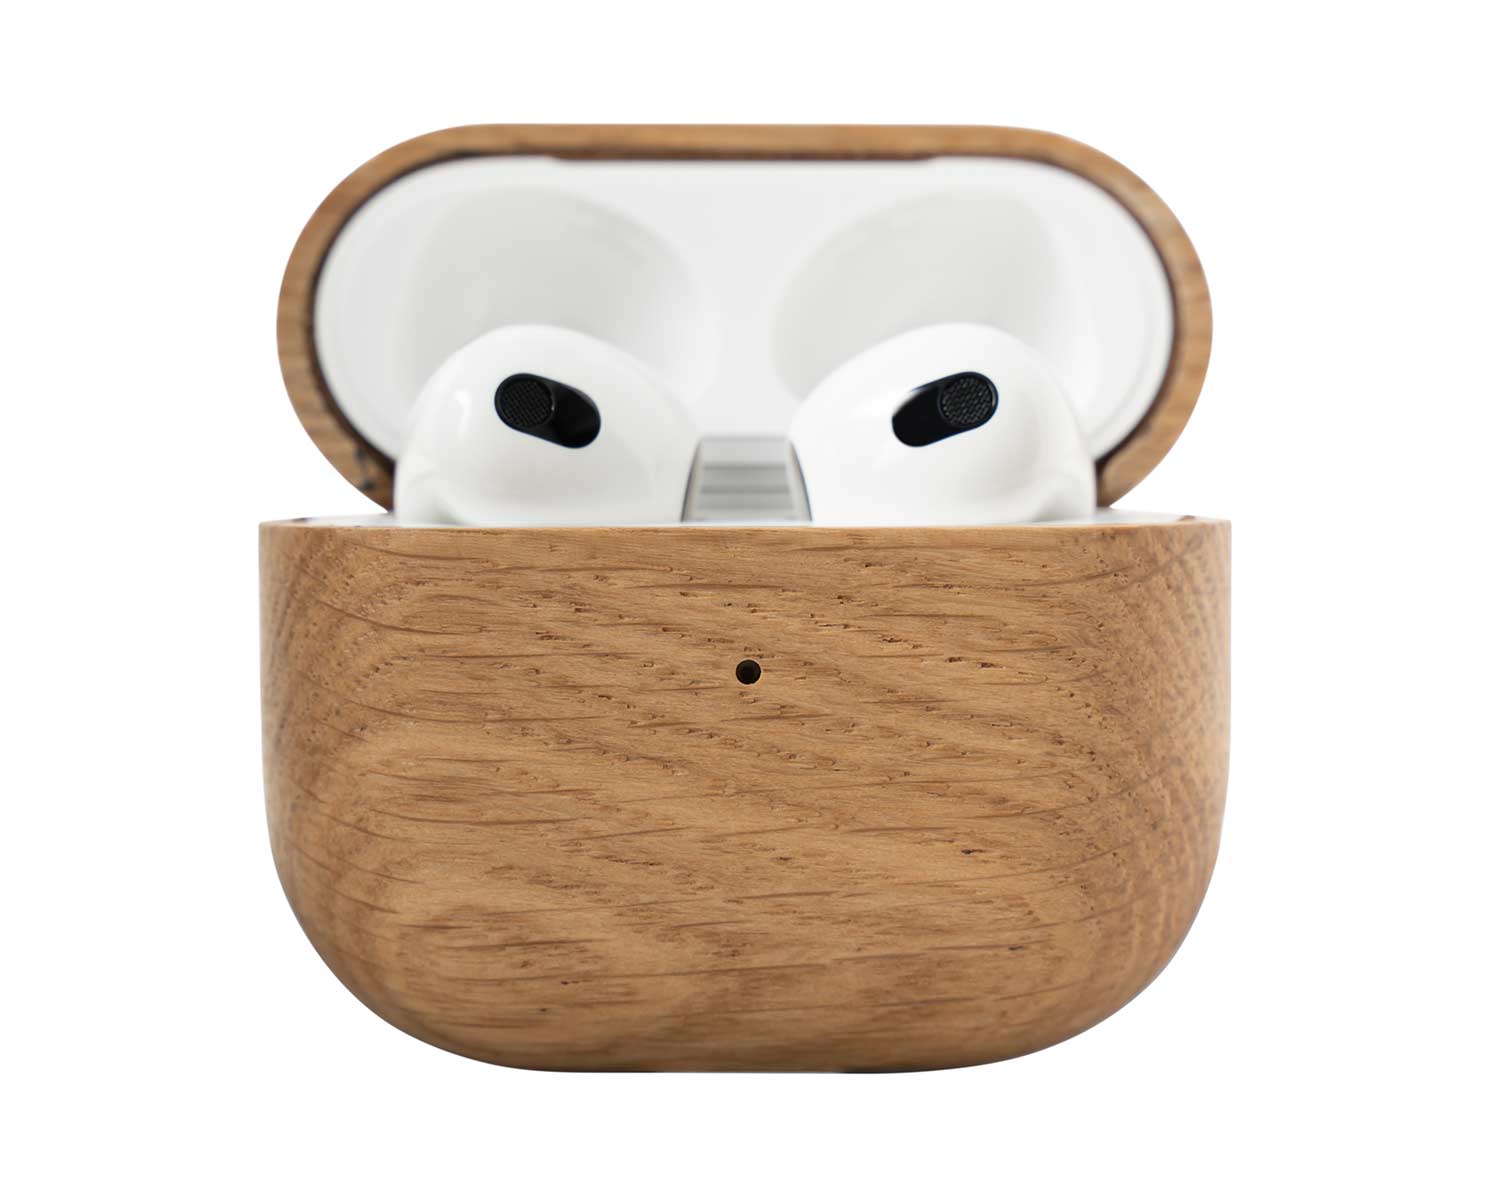 oak wooden AirPods case with AirPods opened front view